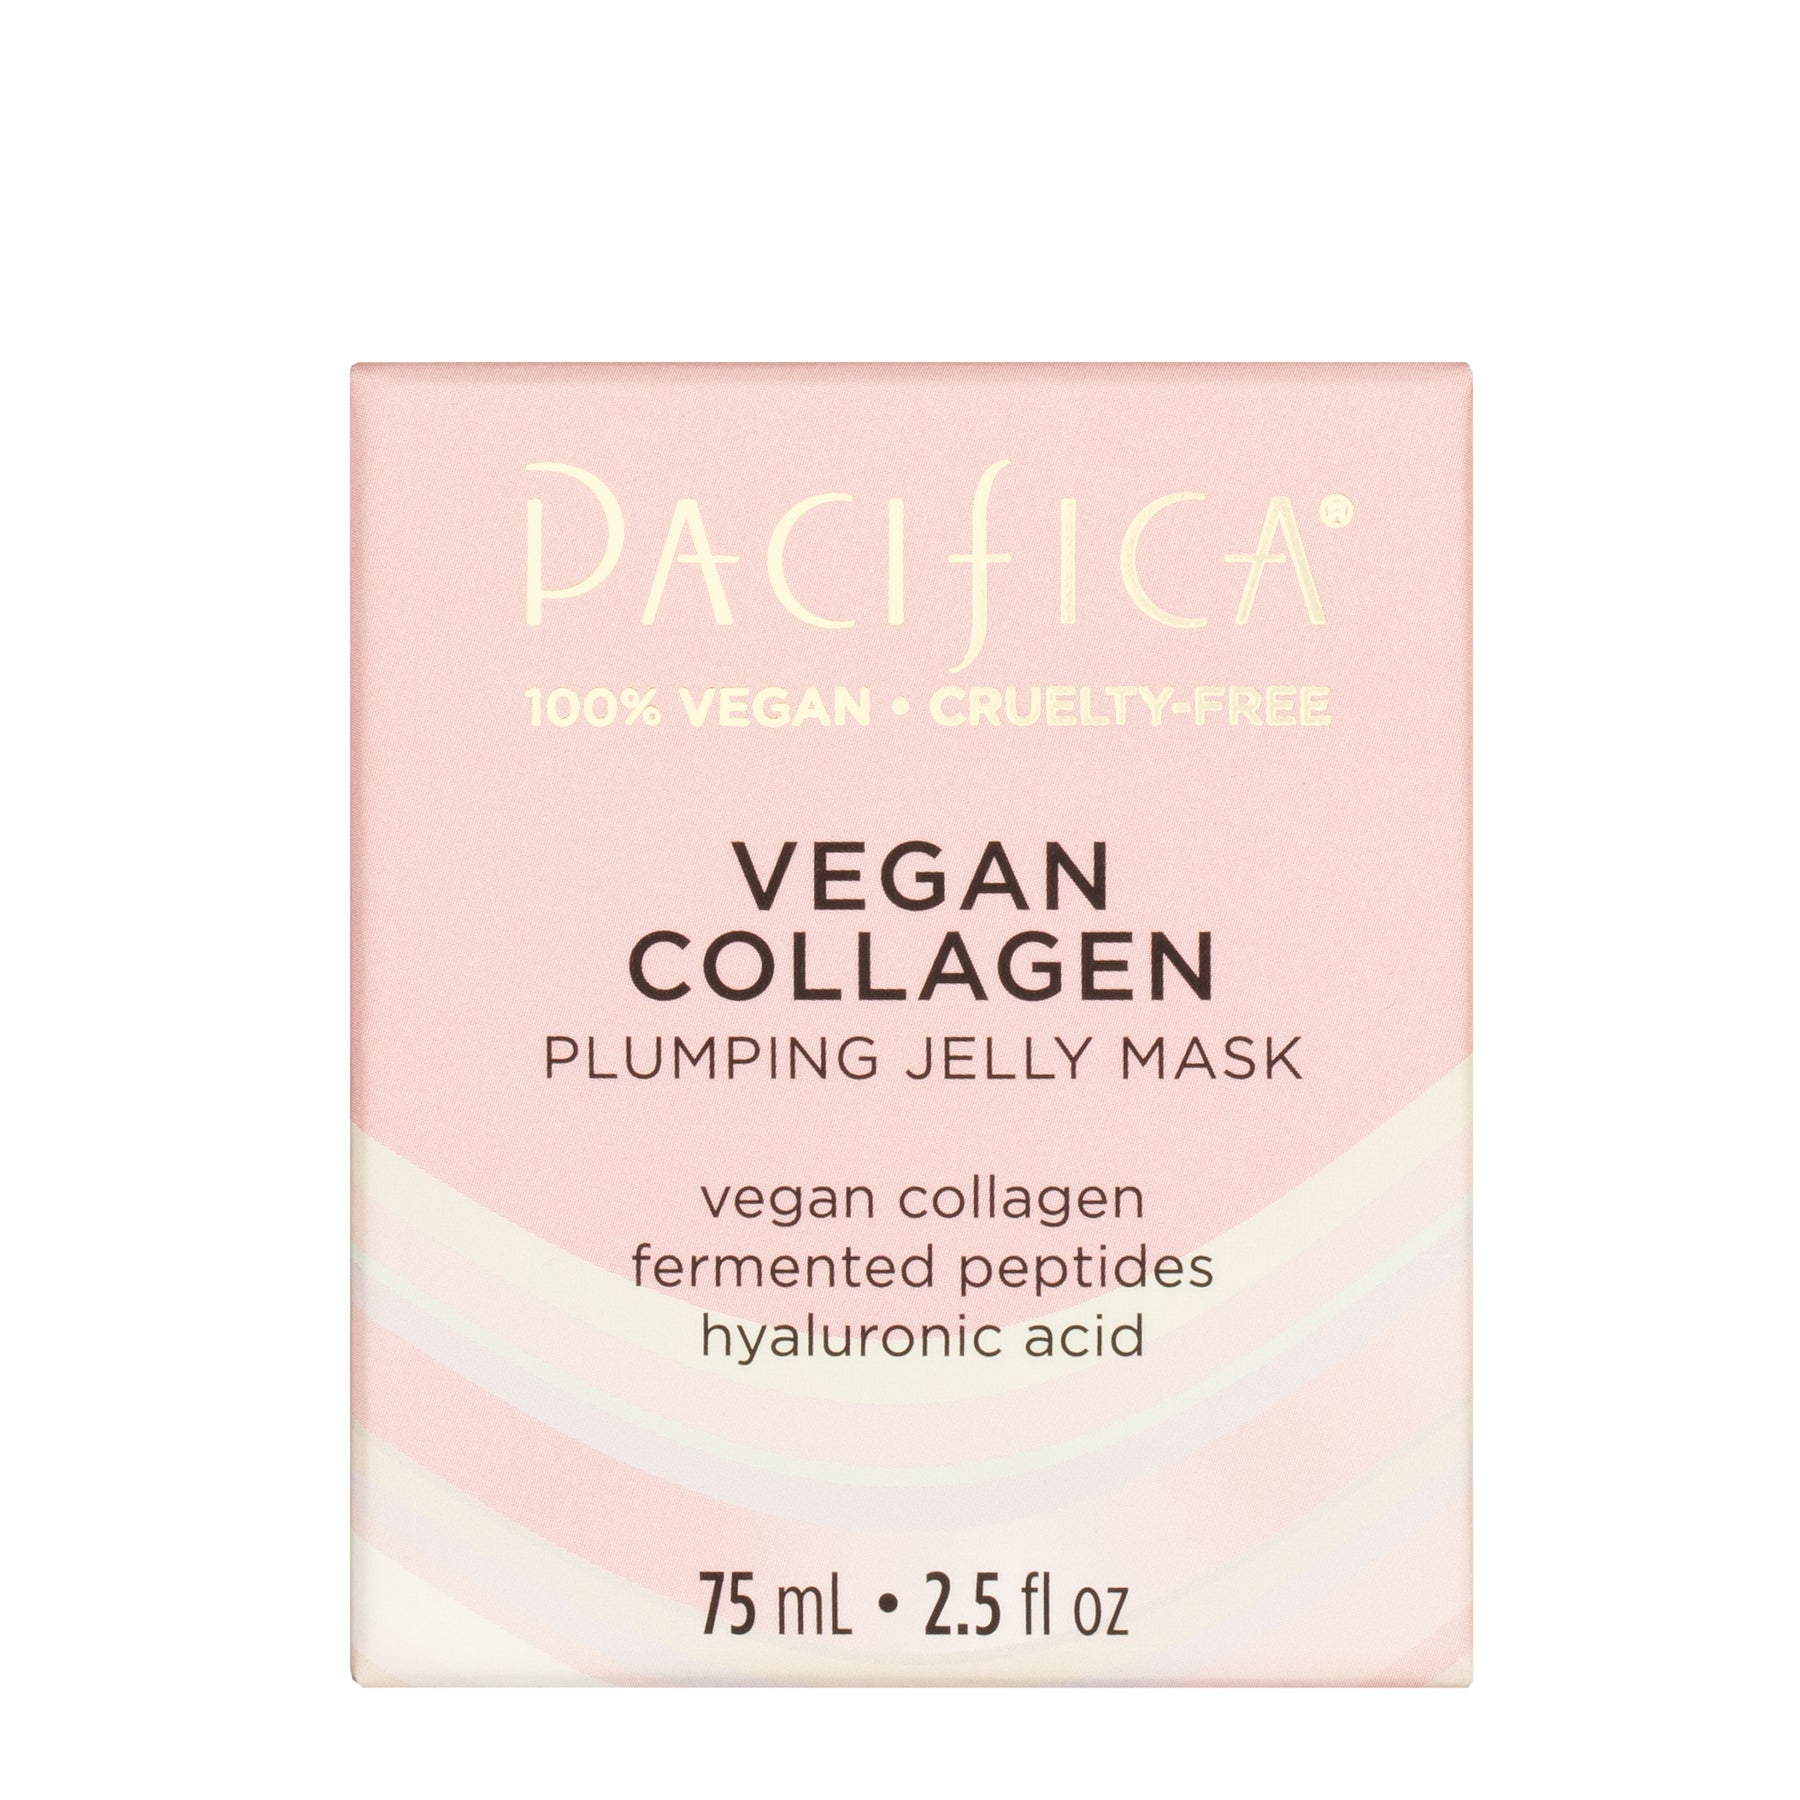 Vegan Collagen Plumping Jelly Mask - Skin Care - Pacifica Beauty